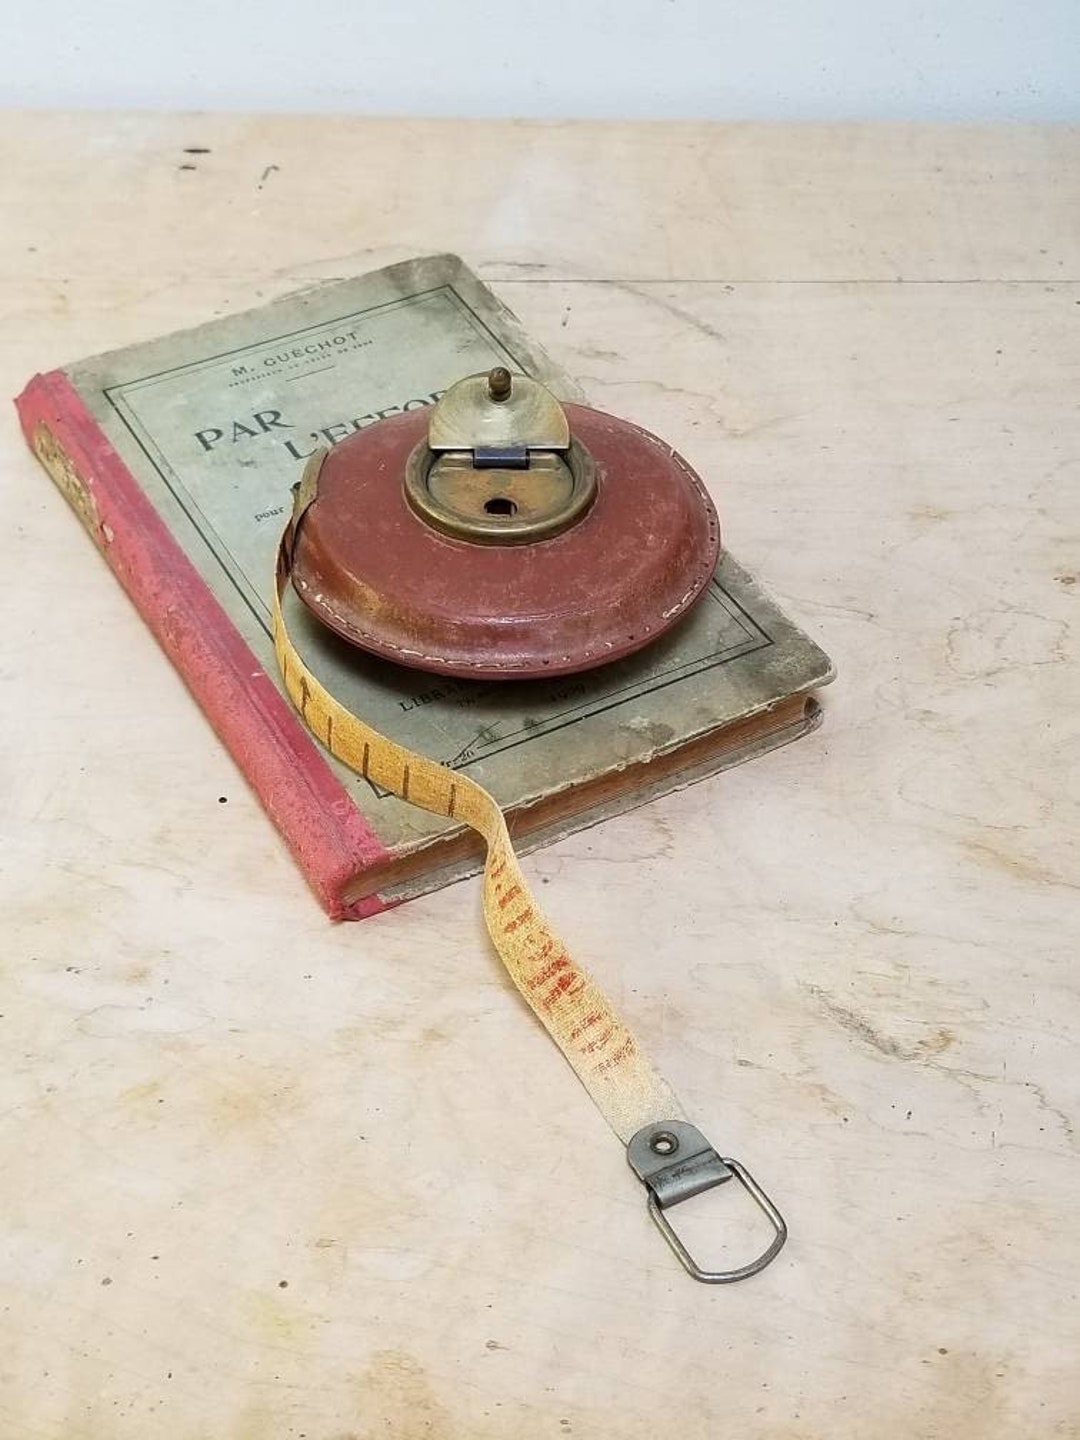 Wired-linen tape measure sample, British, 1928